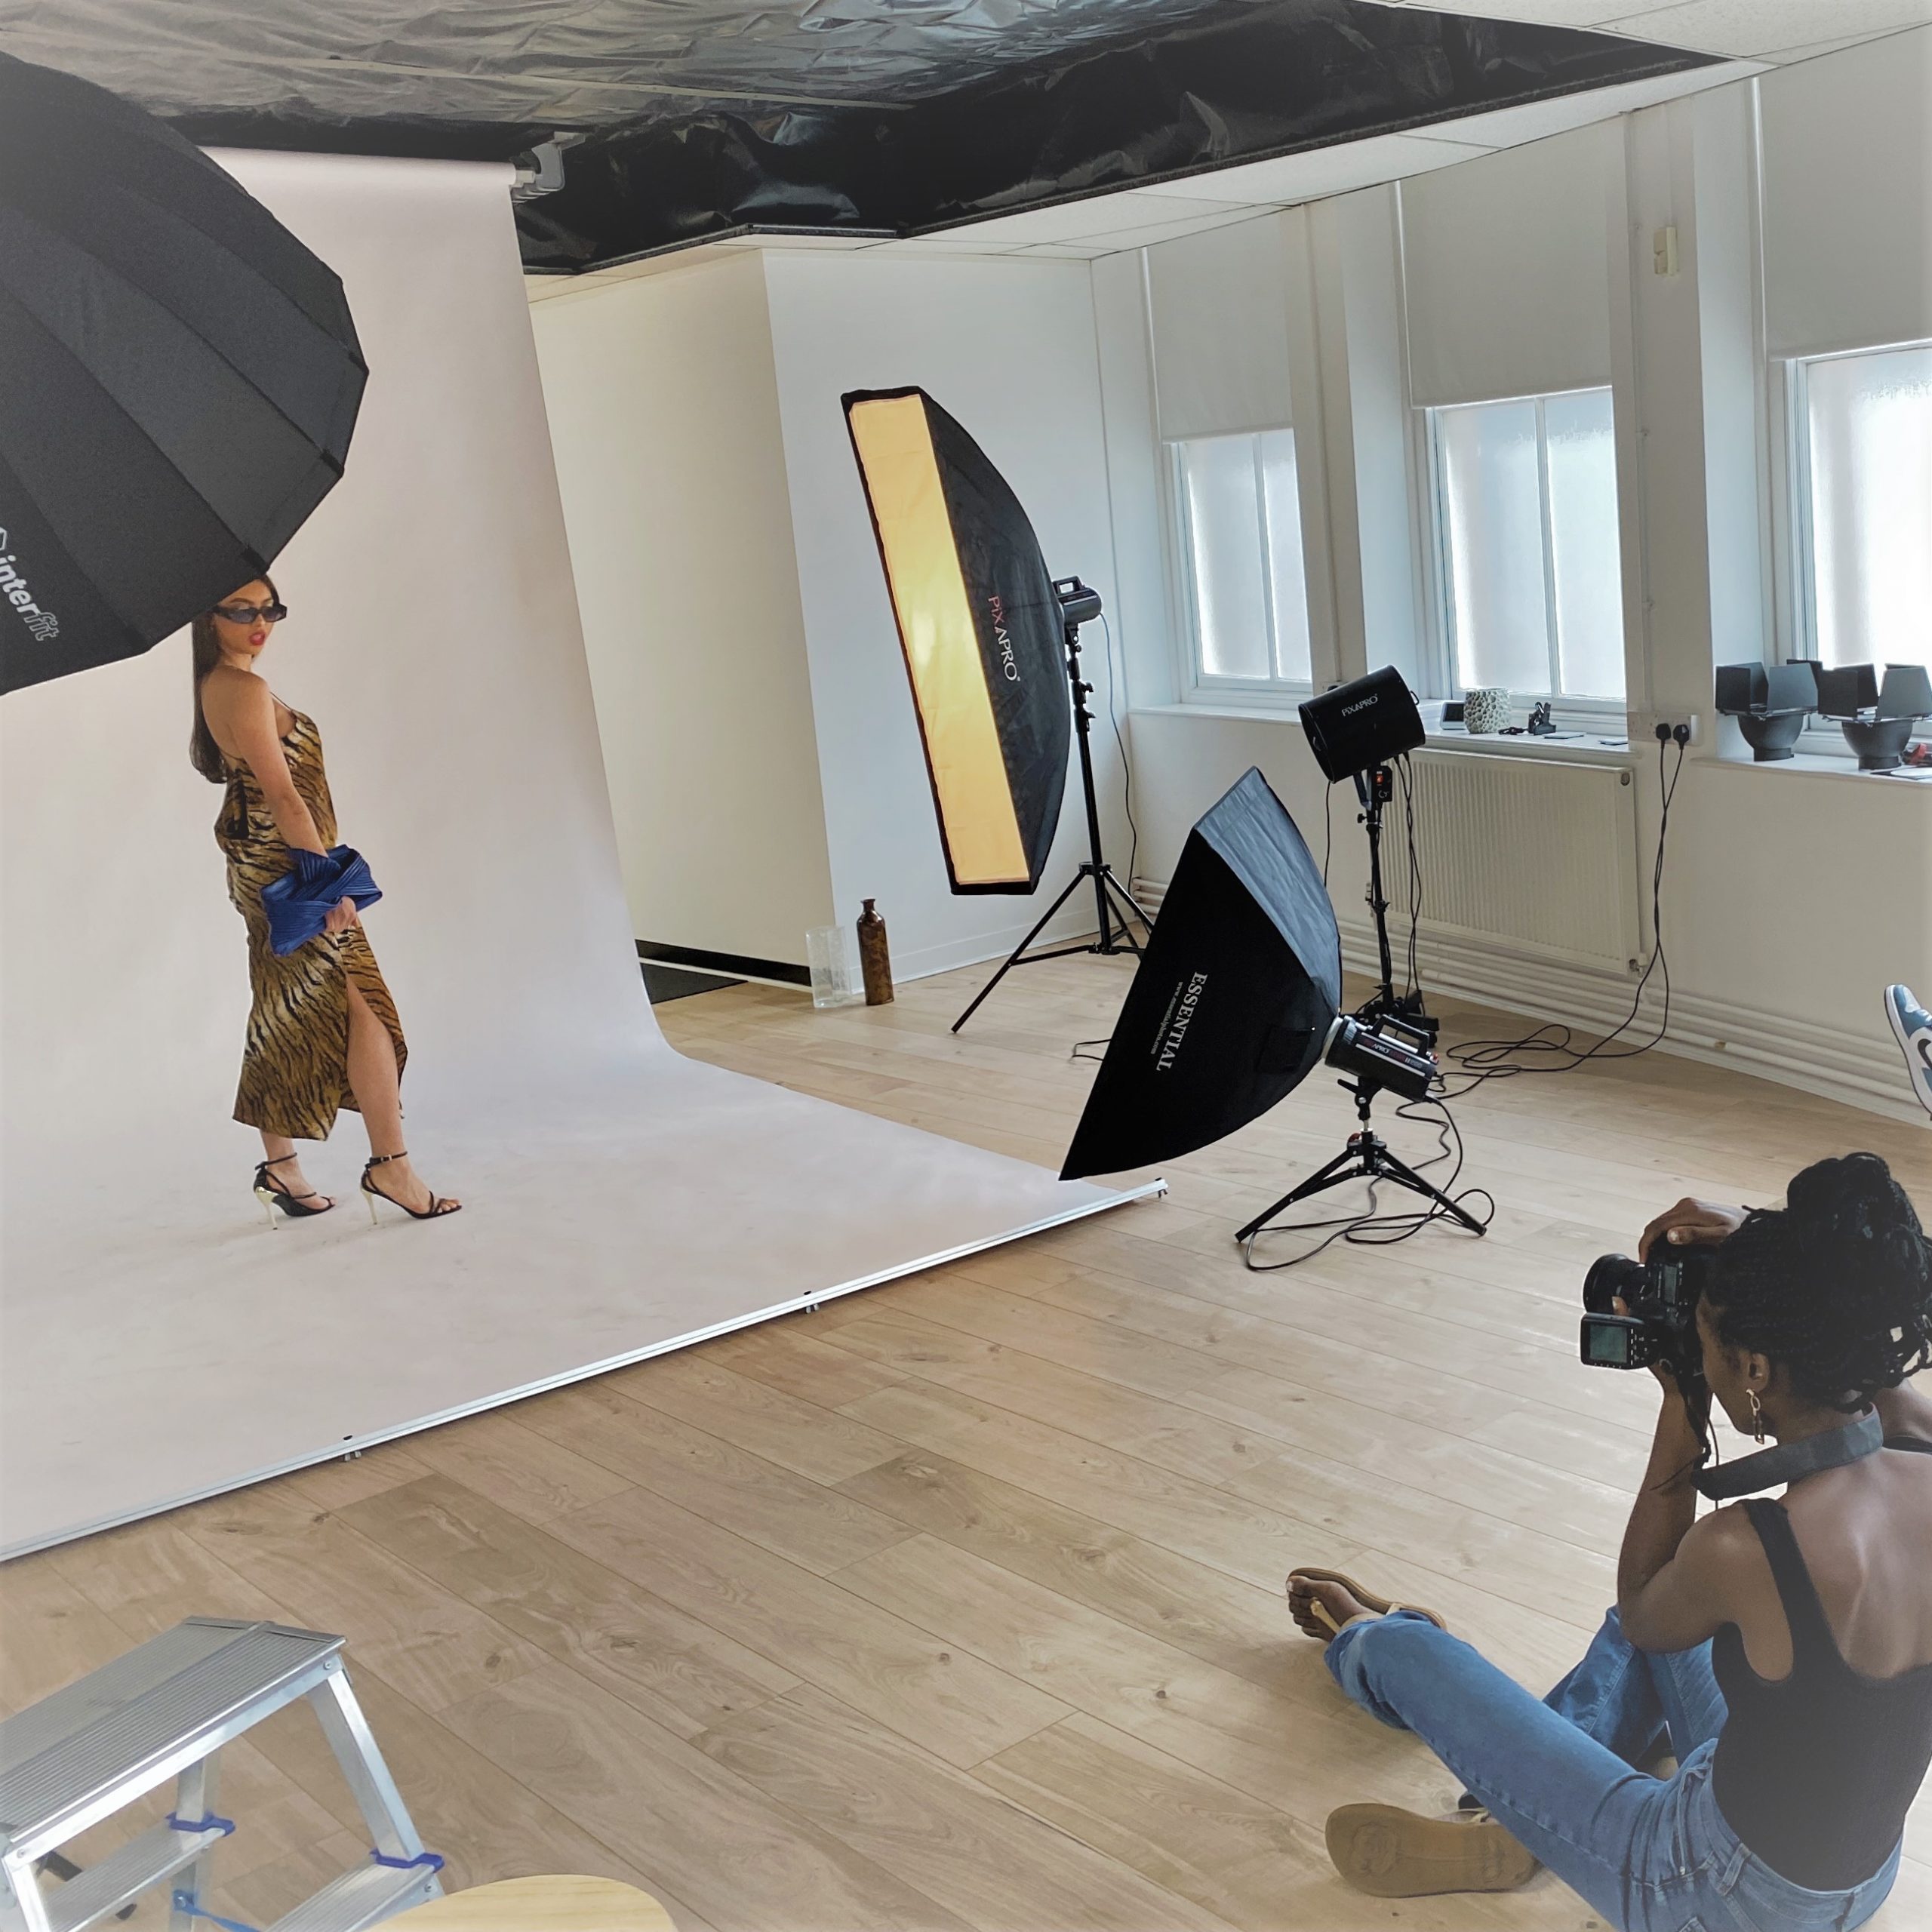 Large photography studio space showing photographer, model, photography backdrop and photography lighting